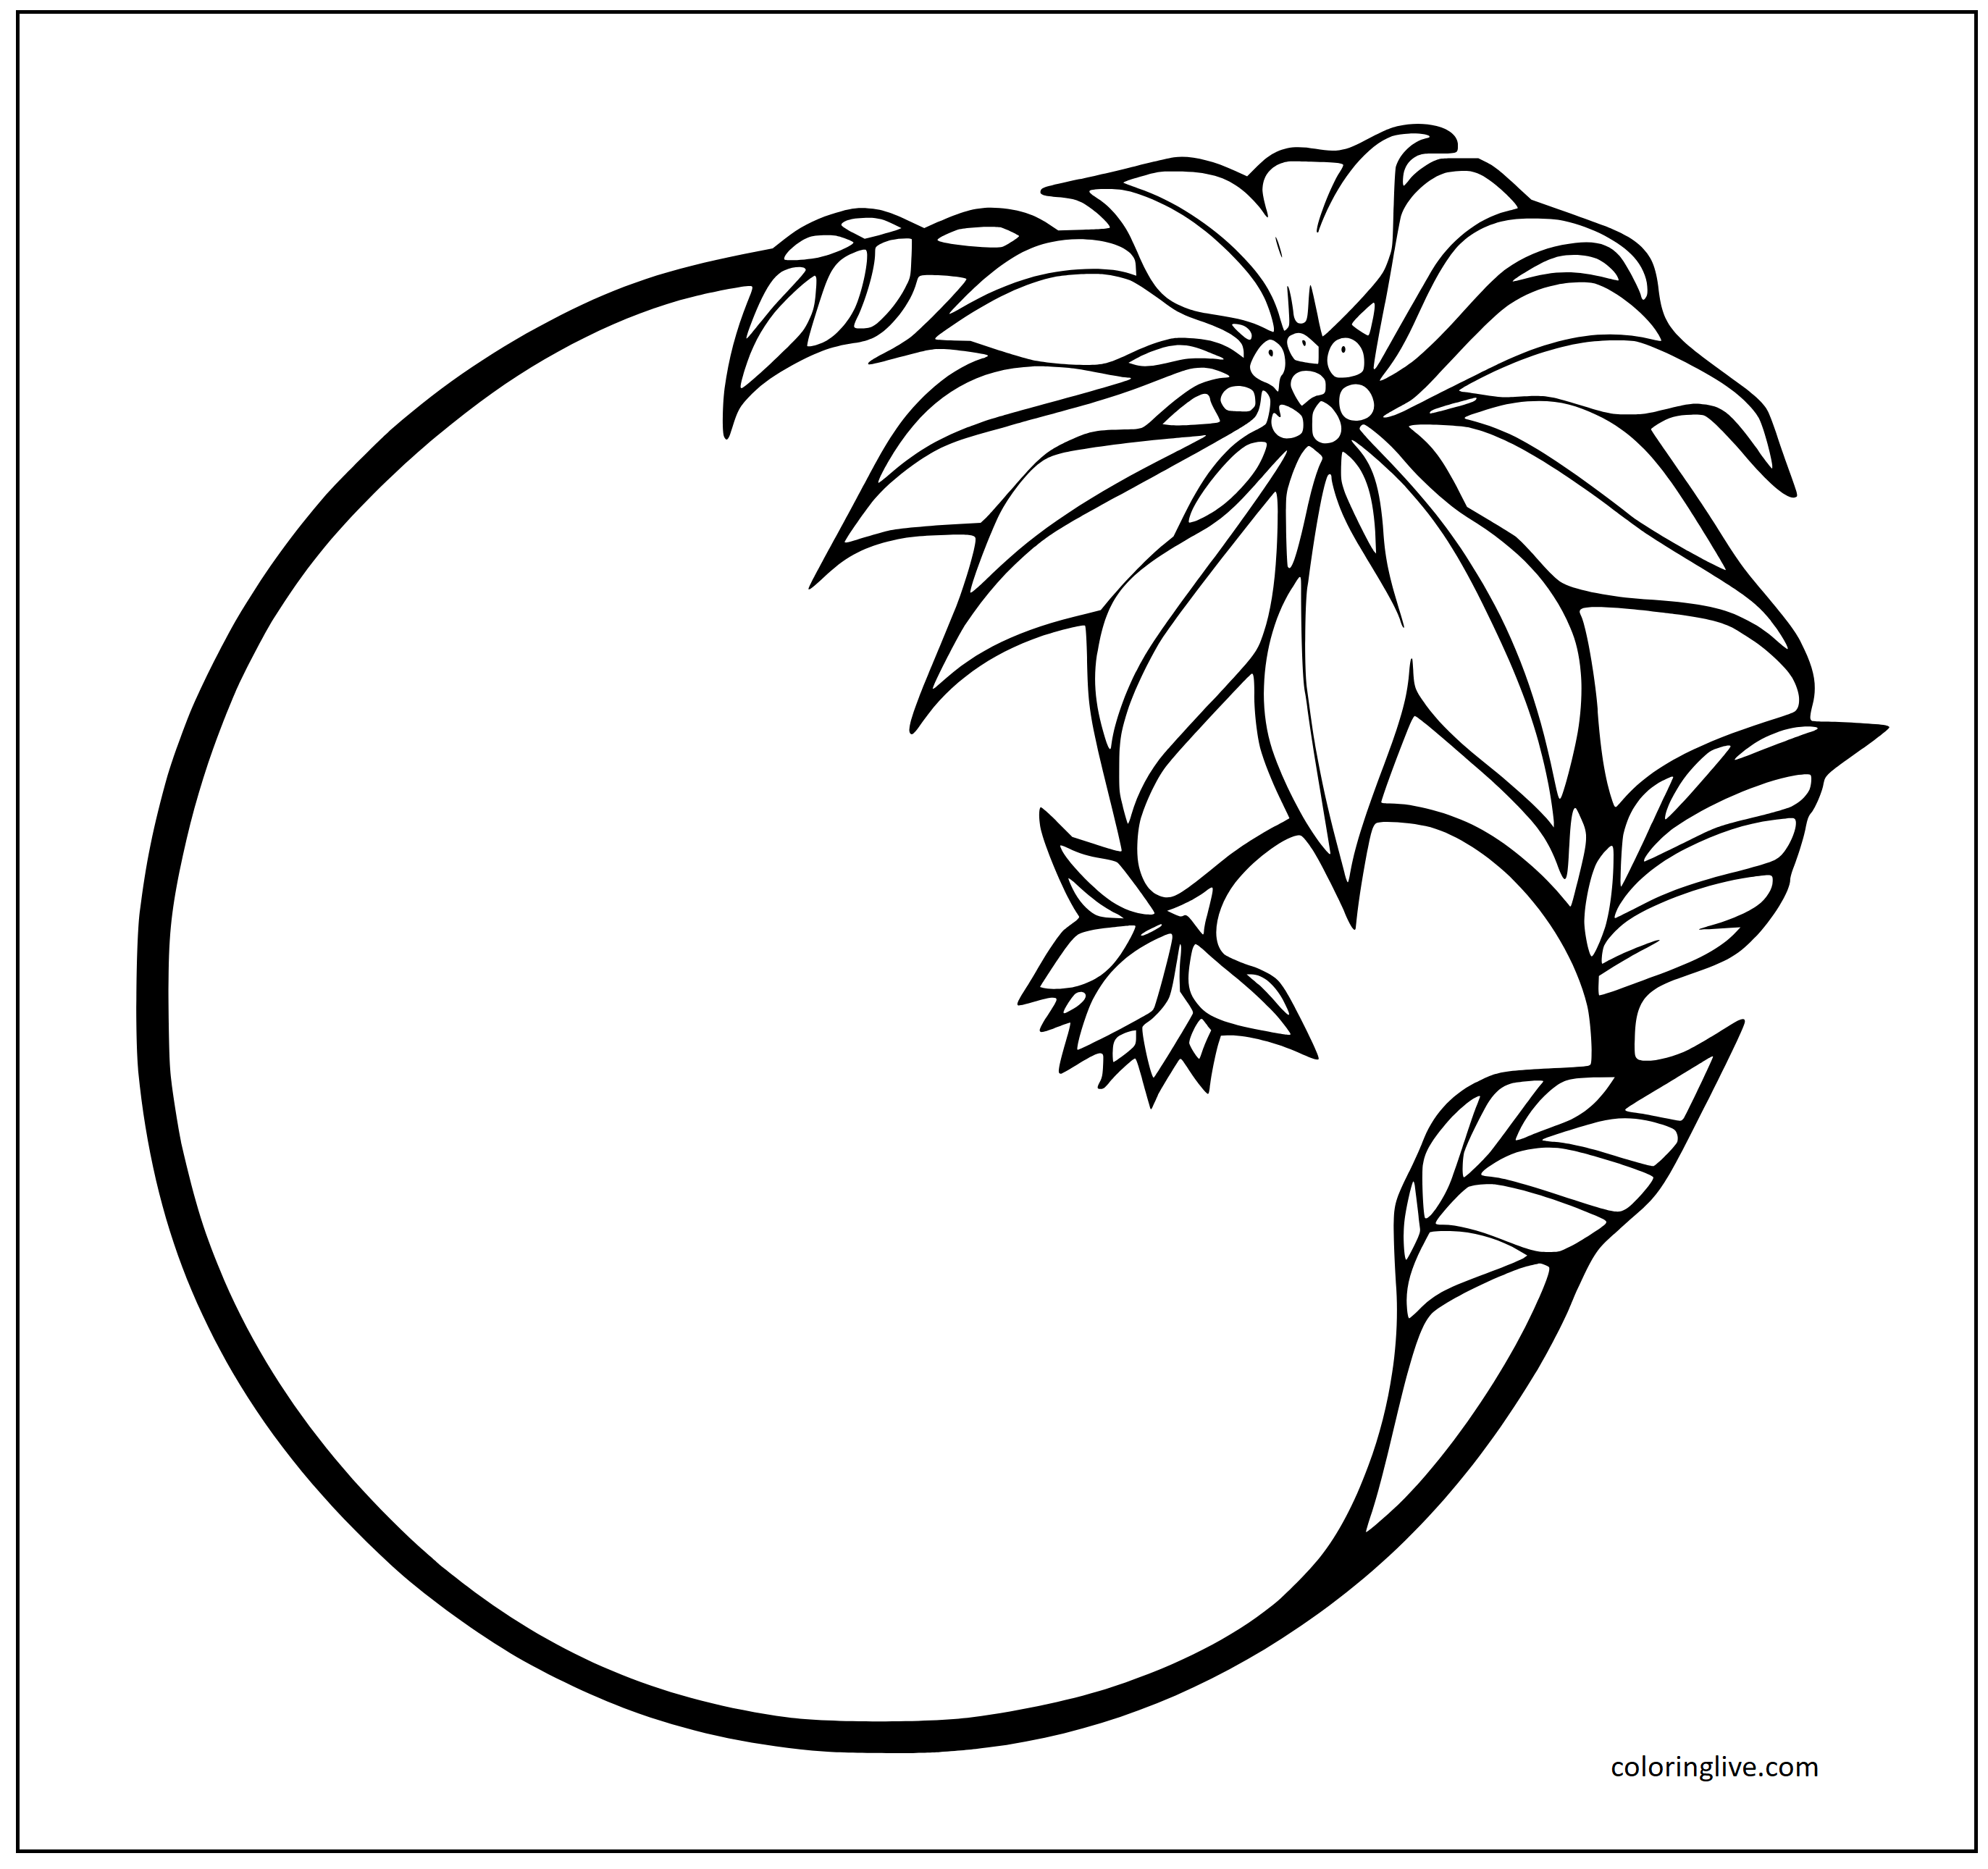 Printable Flowers and Christmas Ornament Coloring Page for kids.